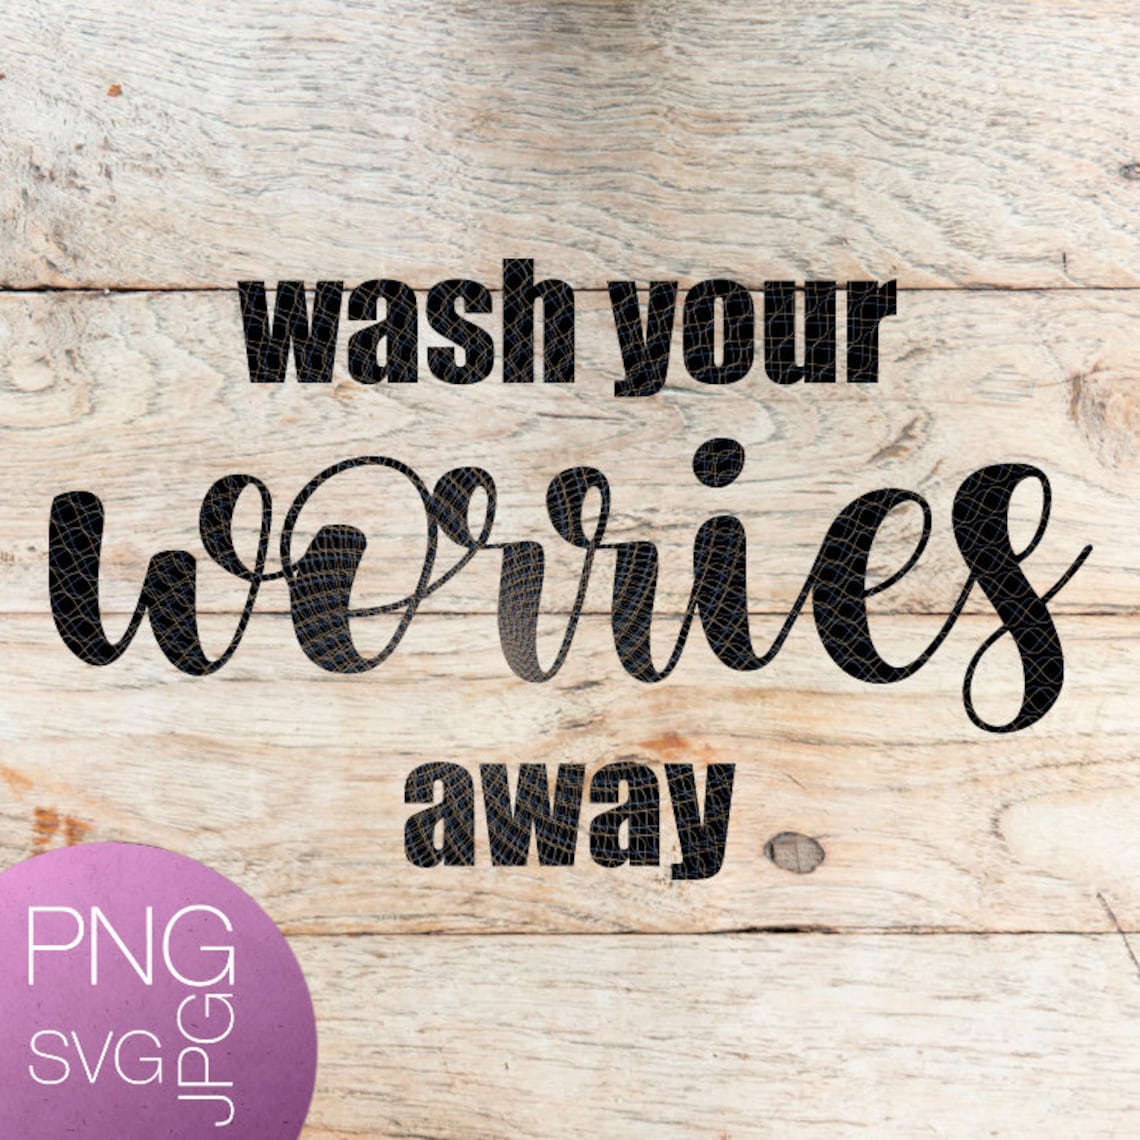 Wash Your Worries Away Svg Quote Jpg Png Shirt Cut File Cricut | Etsy